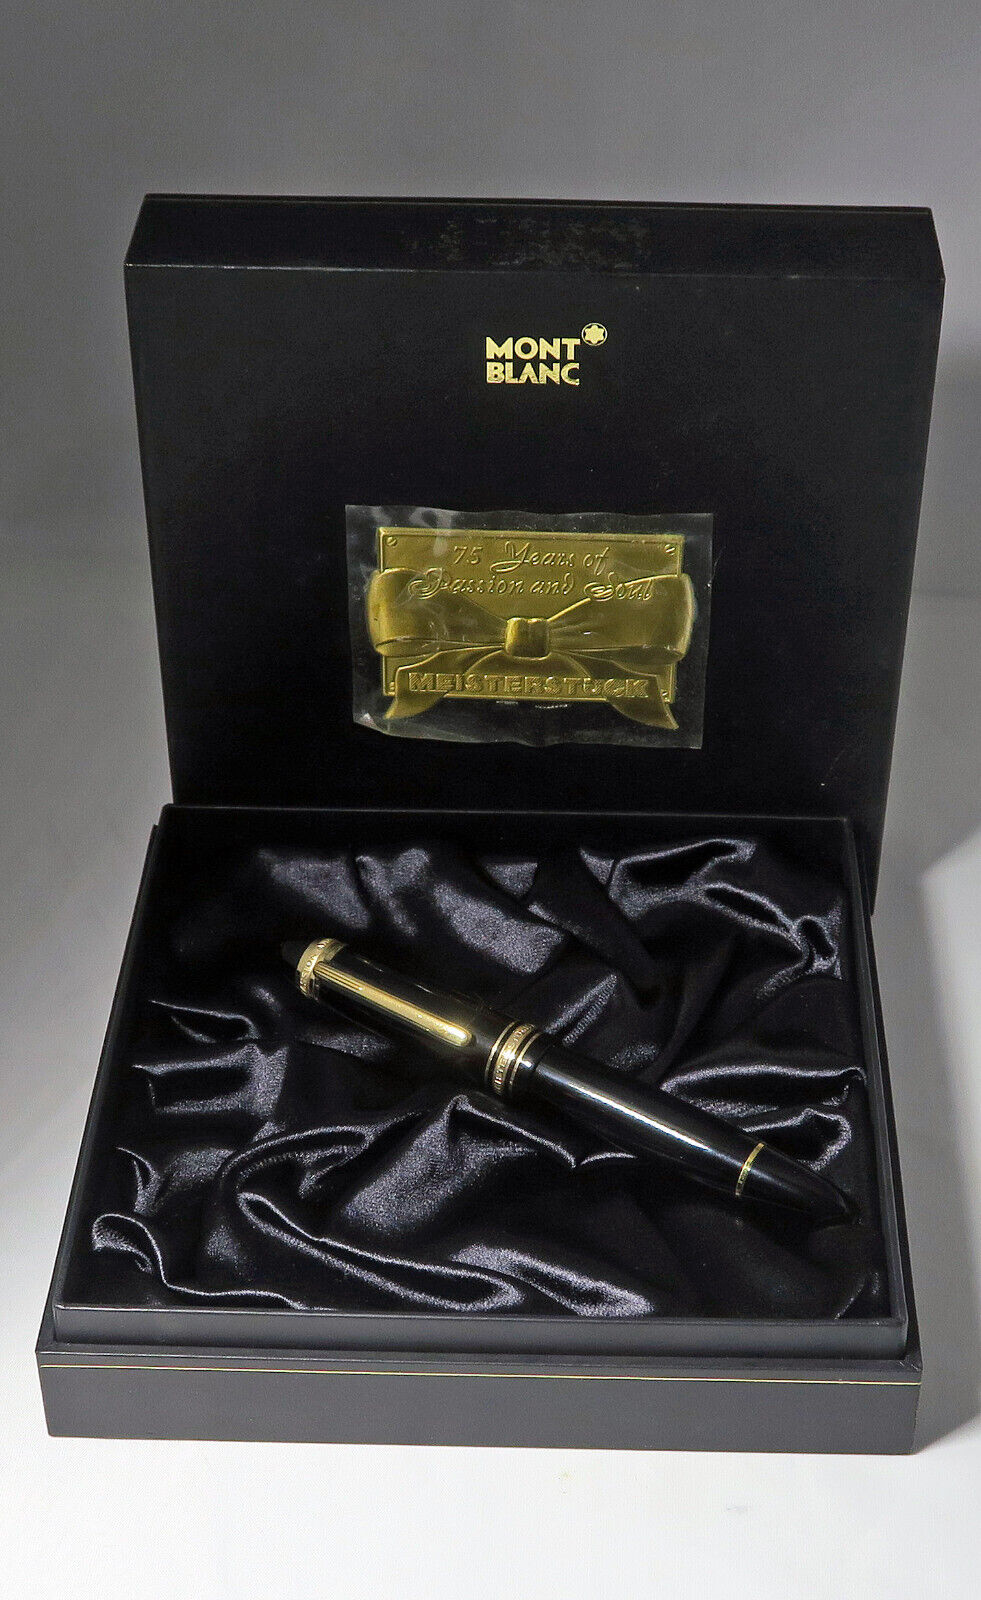 MONTBLANC Meisterstuck 75th Anniversary Special Edition 149 Fountain Pen